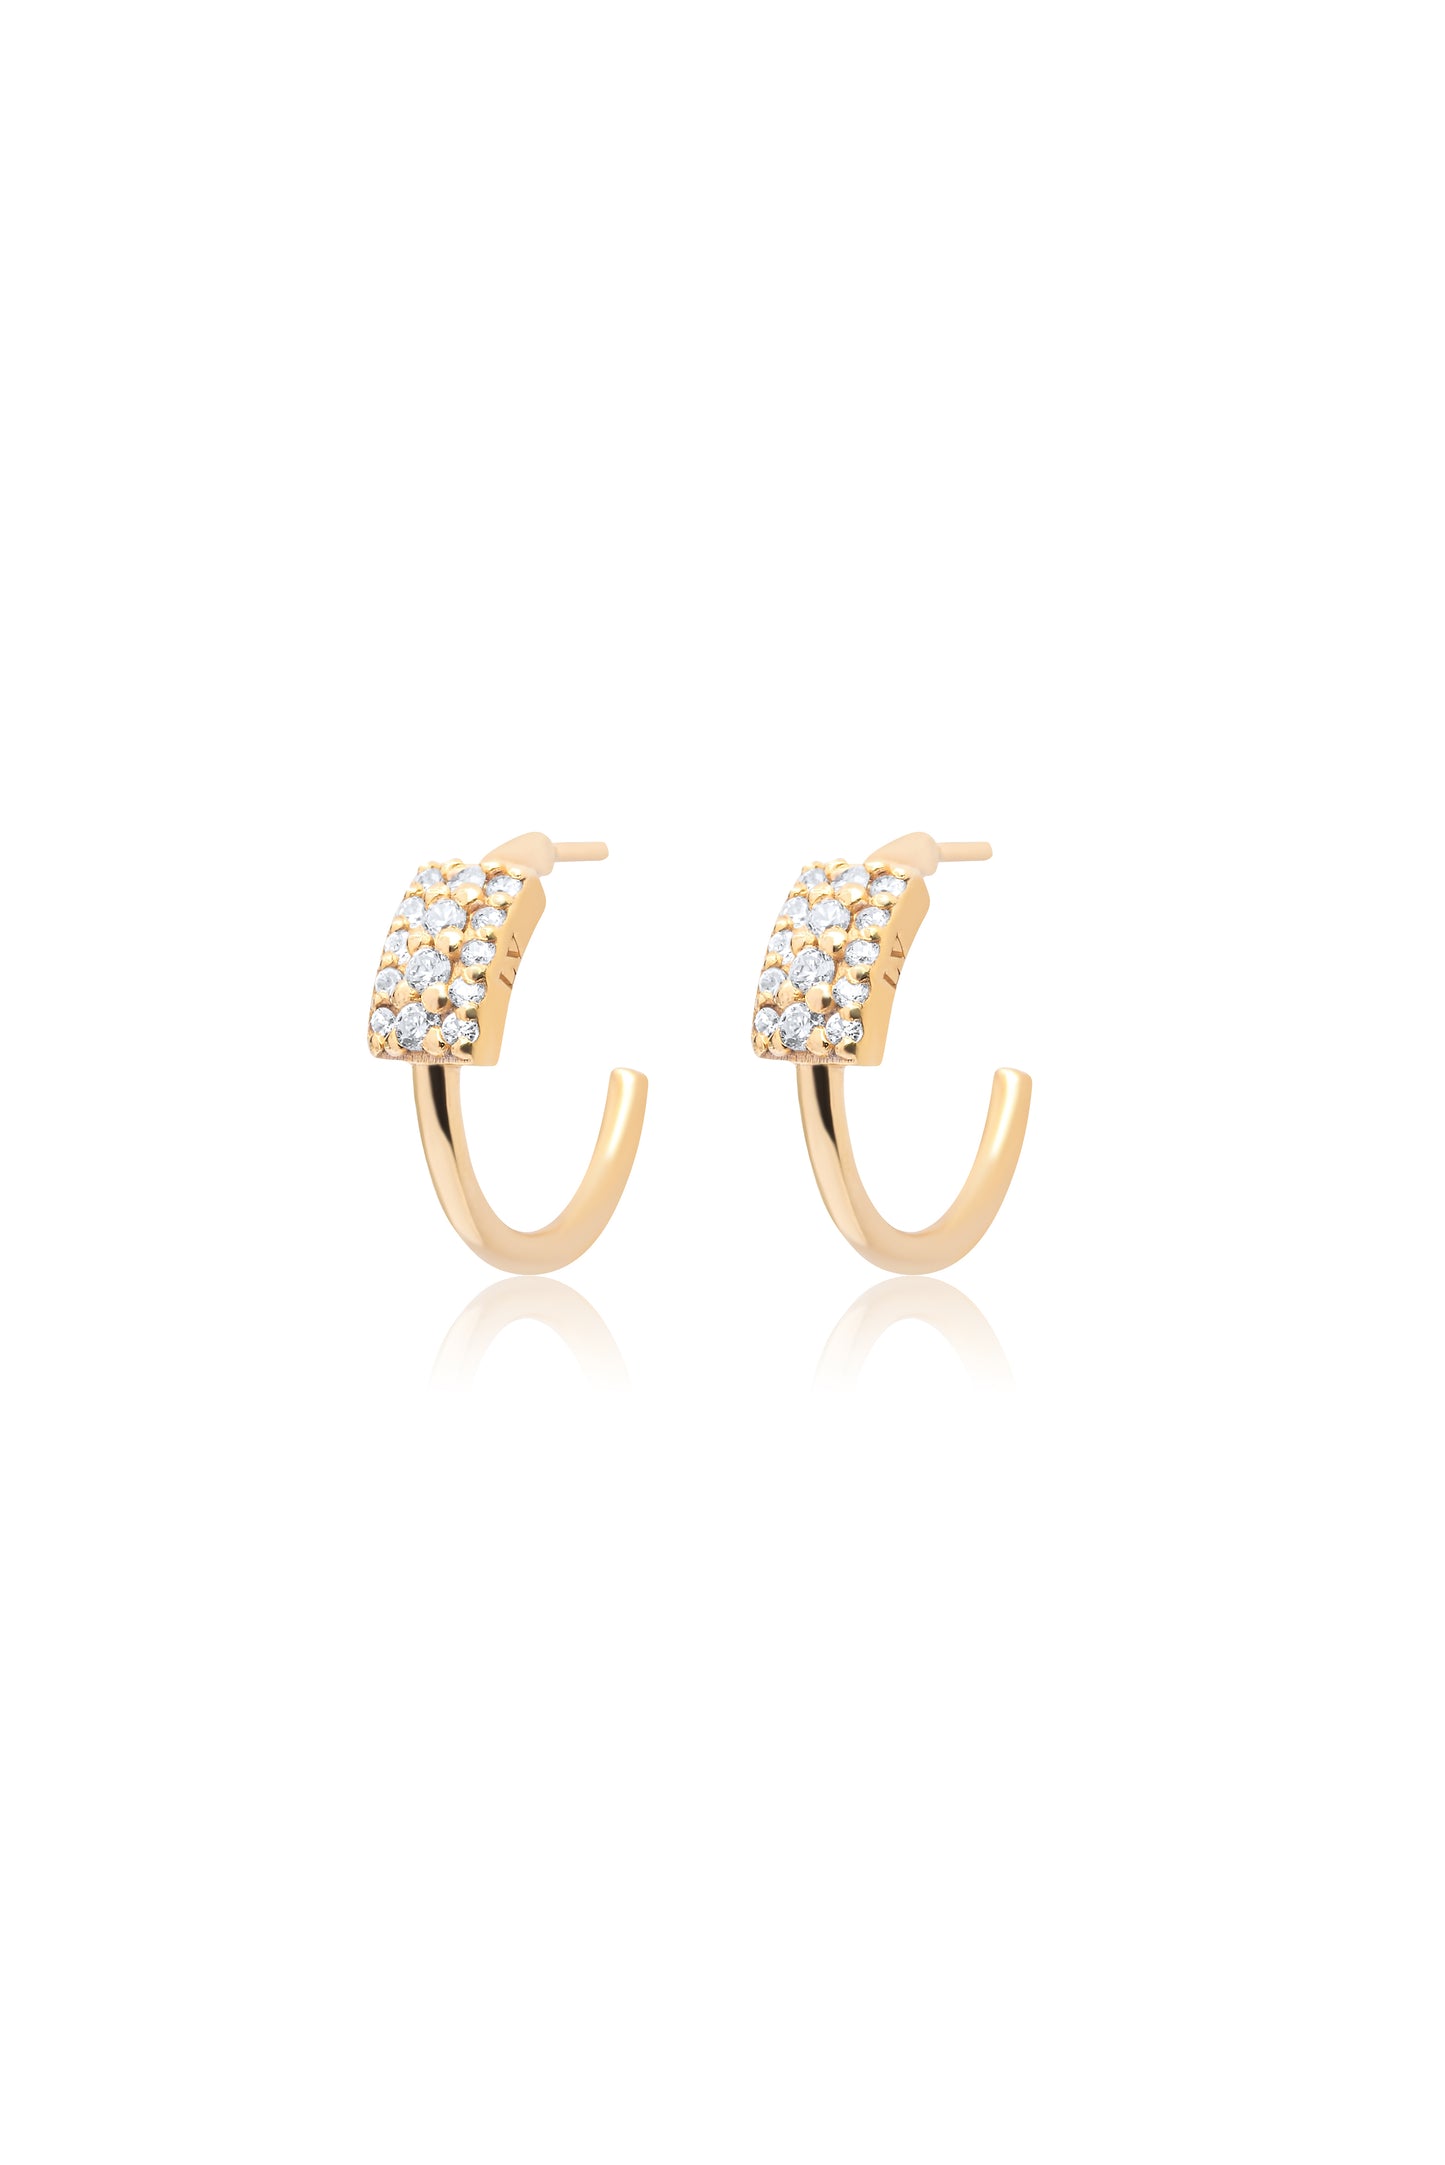 White Pave Hoops Pair Earrings - Gold Plated